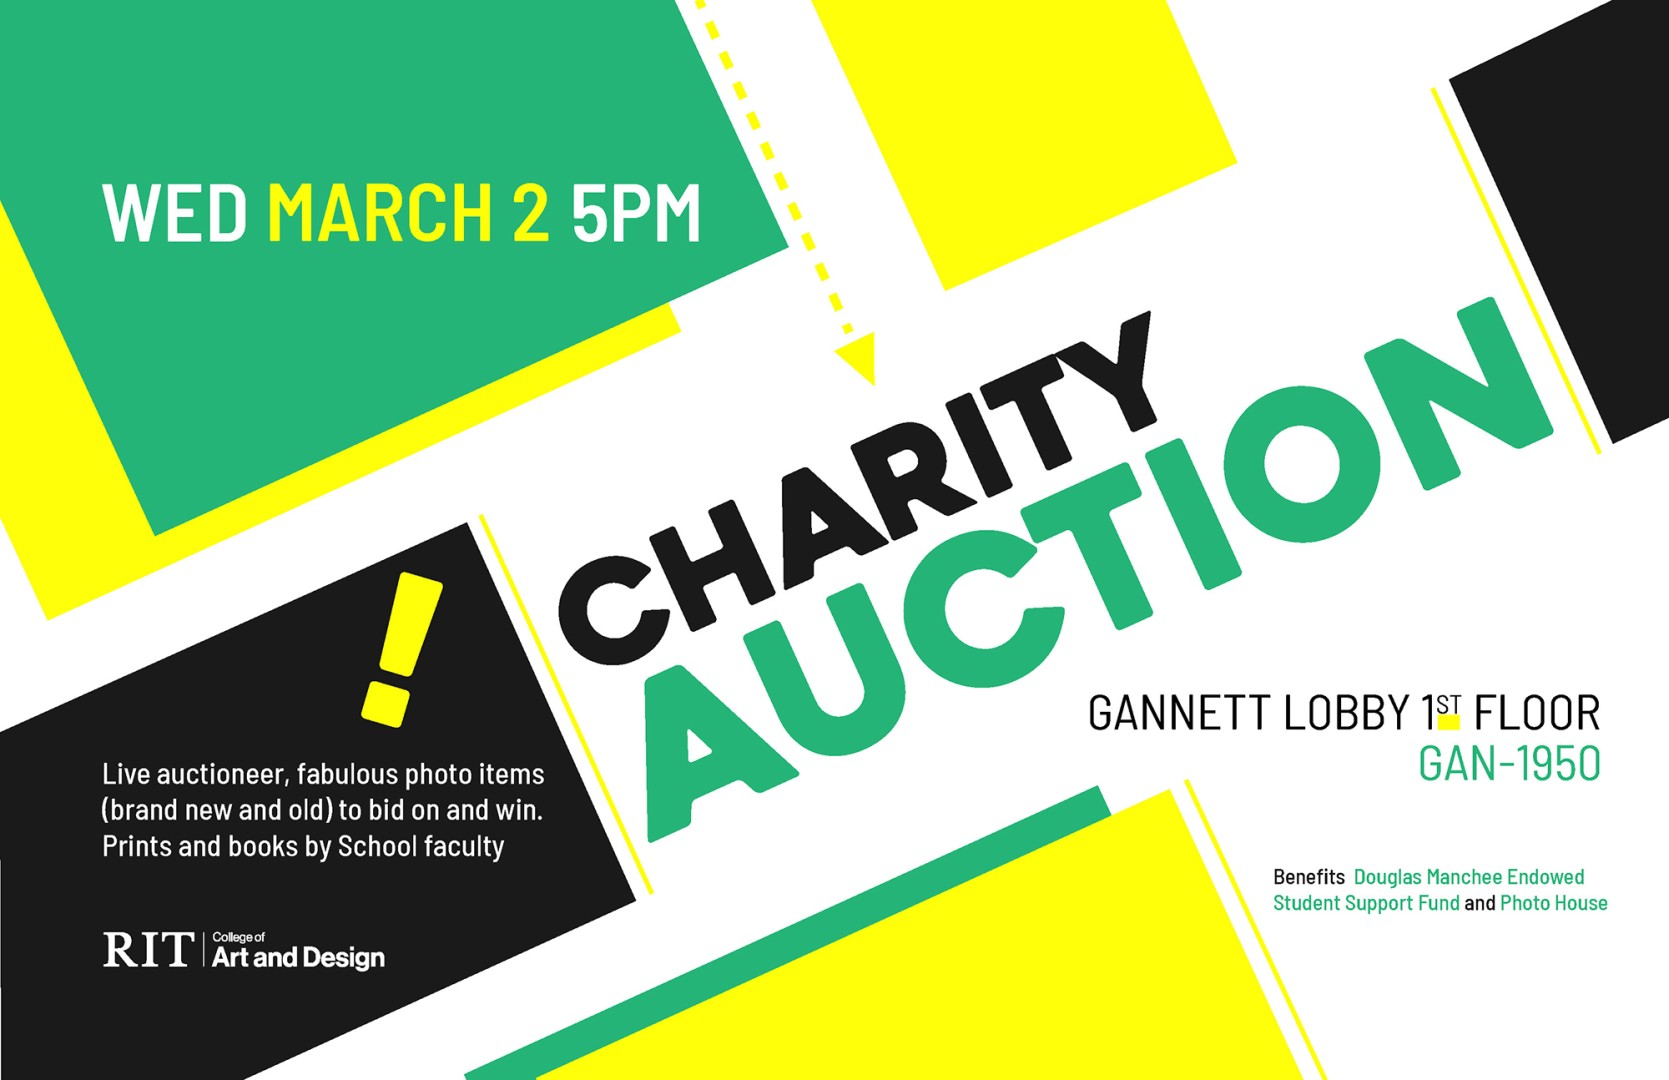 A graphic promoting a charity auction.